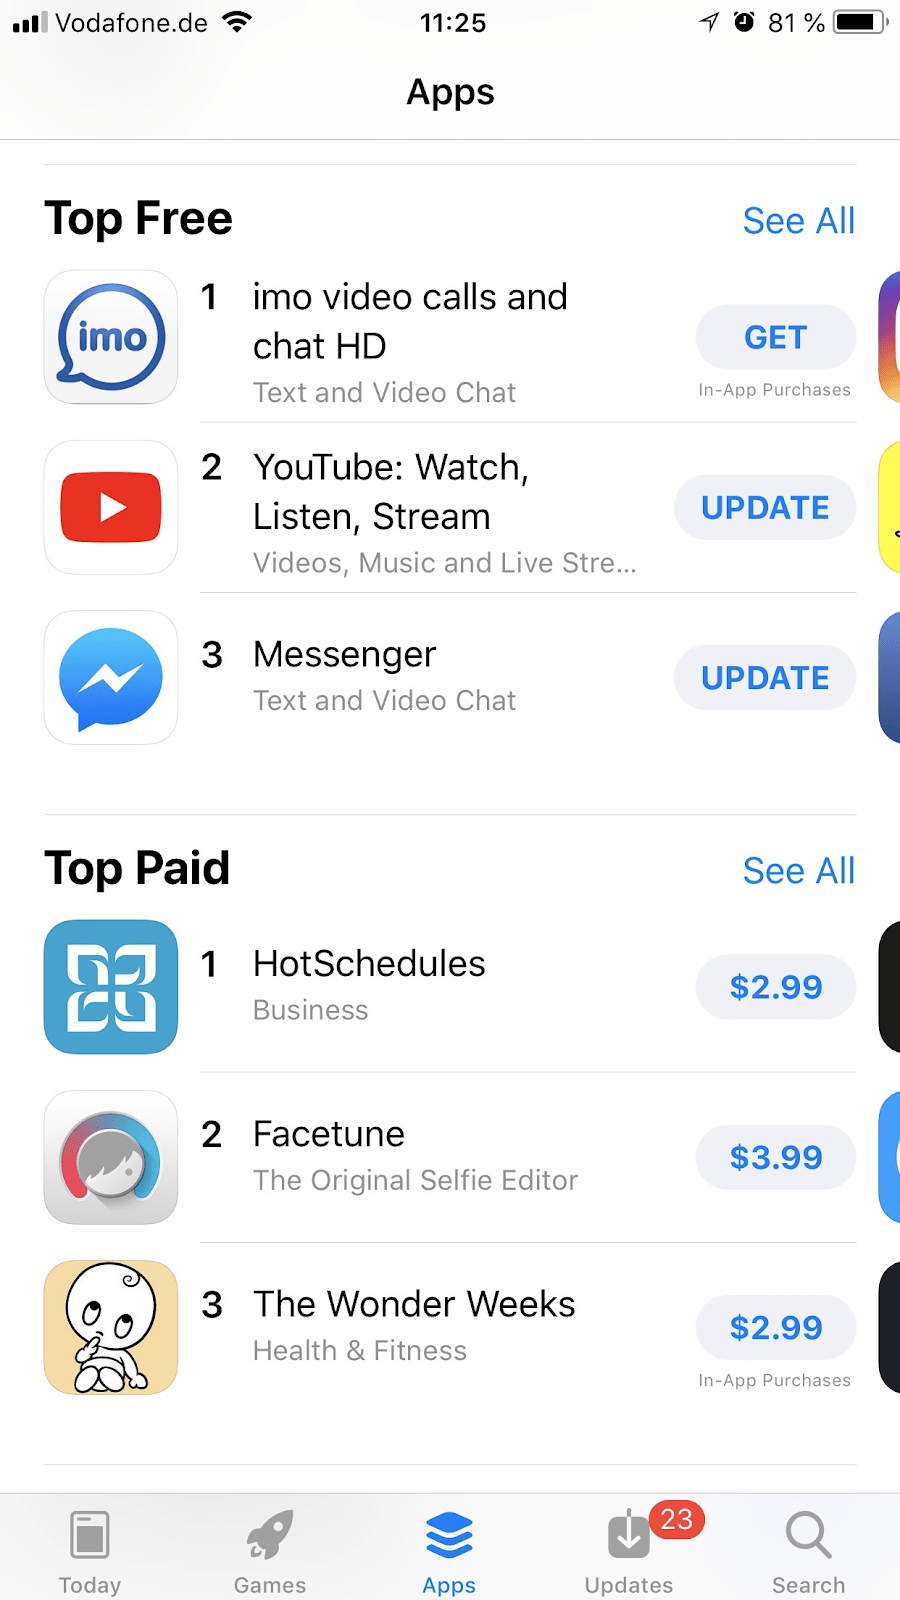 App Store’s Top Free and Top Paid sections now feature more apps on iOS 12